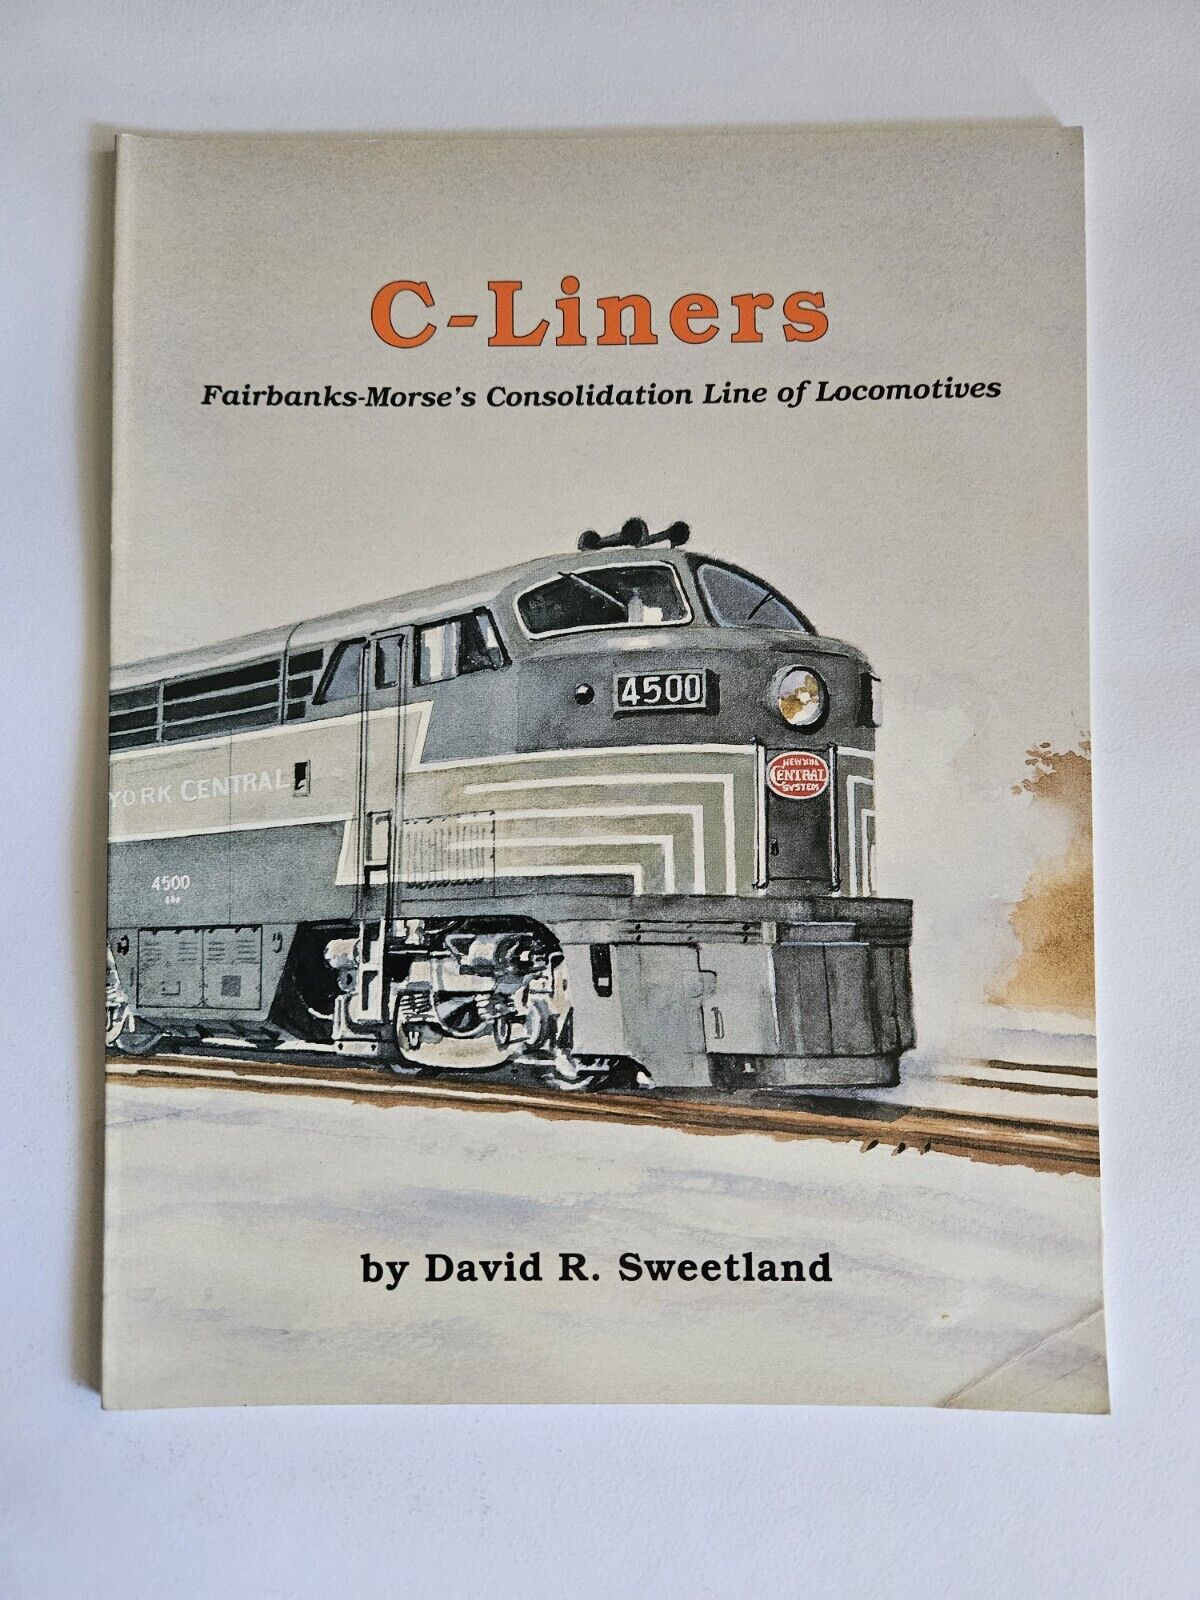 C-Liners Fairbanks-Morse\'s Consolidation Line of Locomotives by David Sweetland